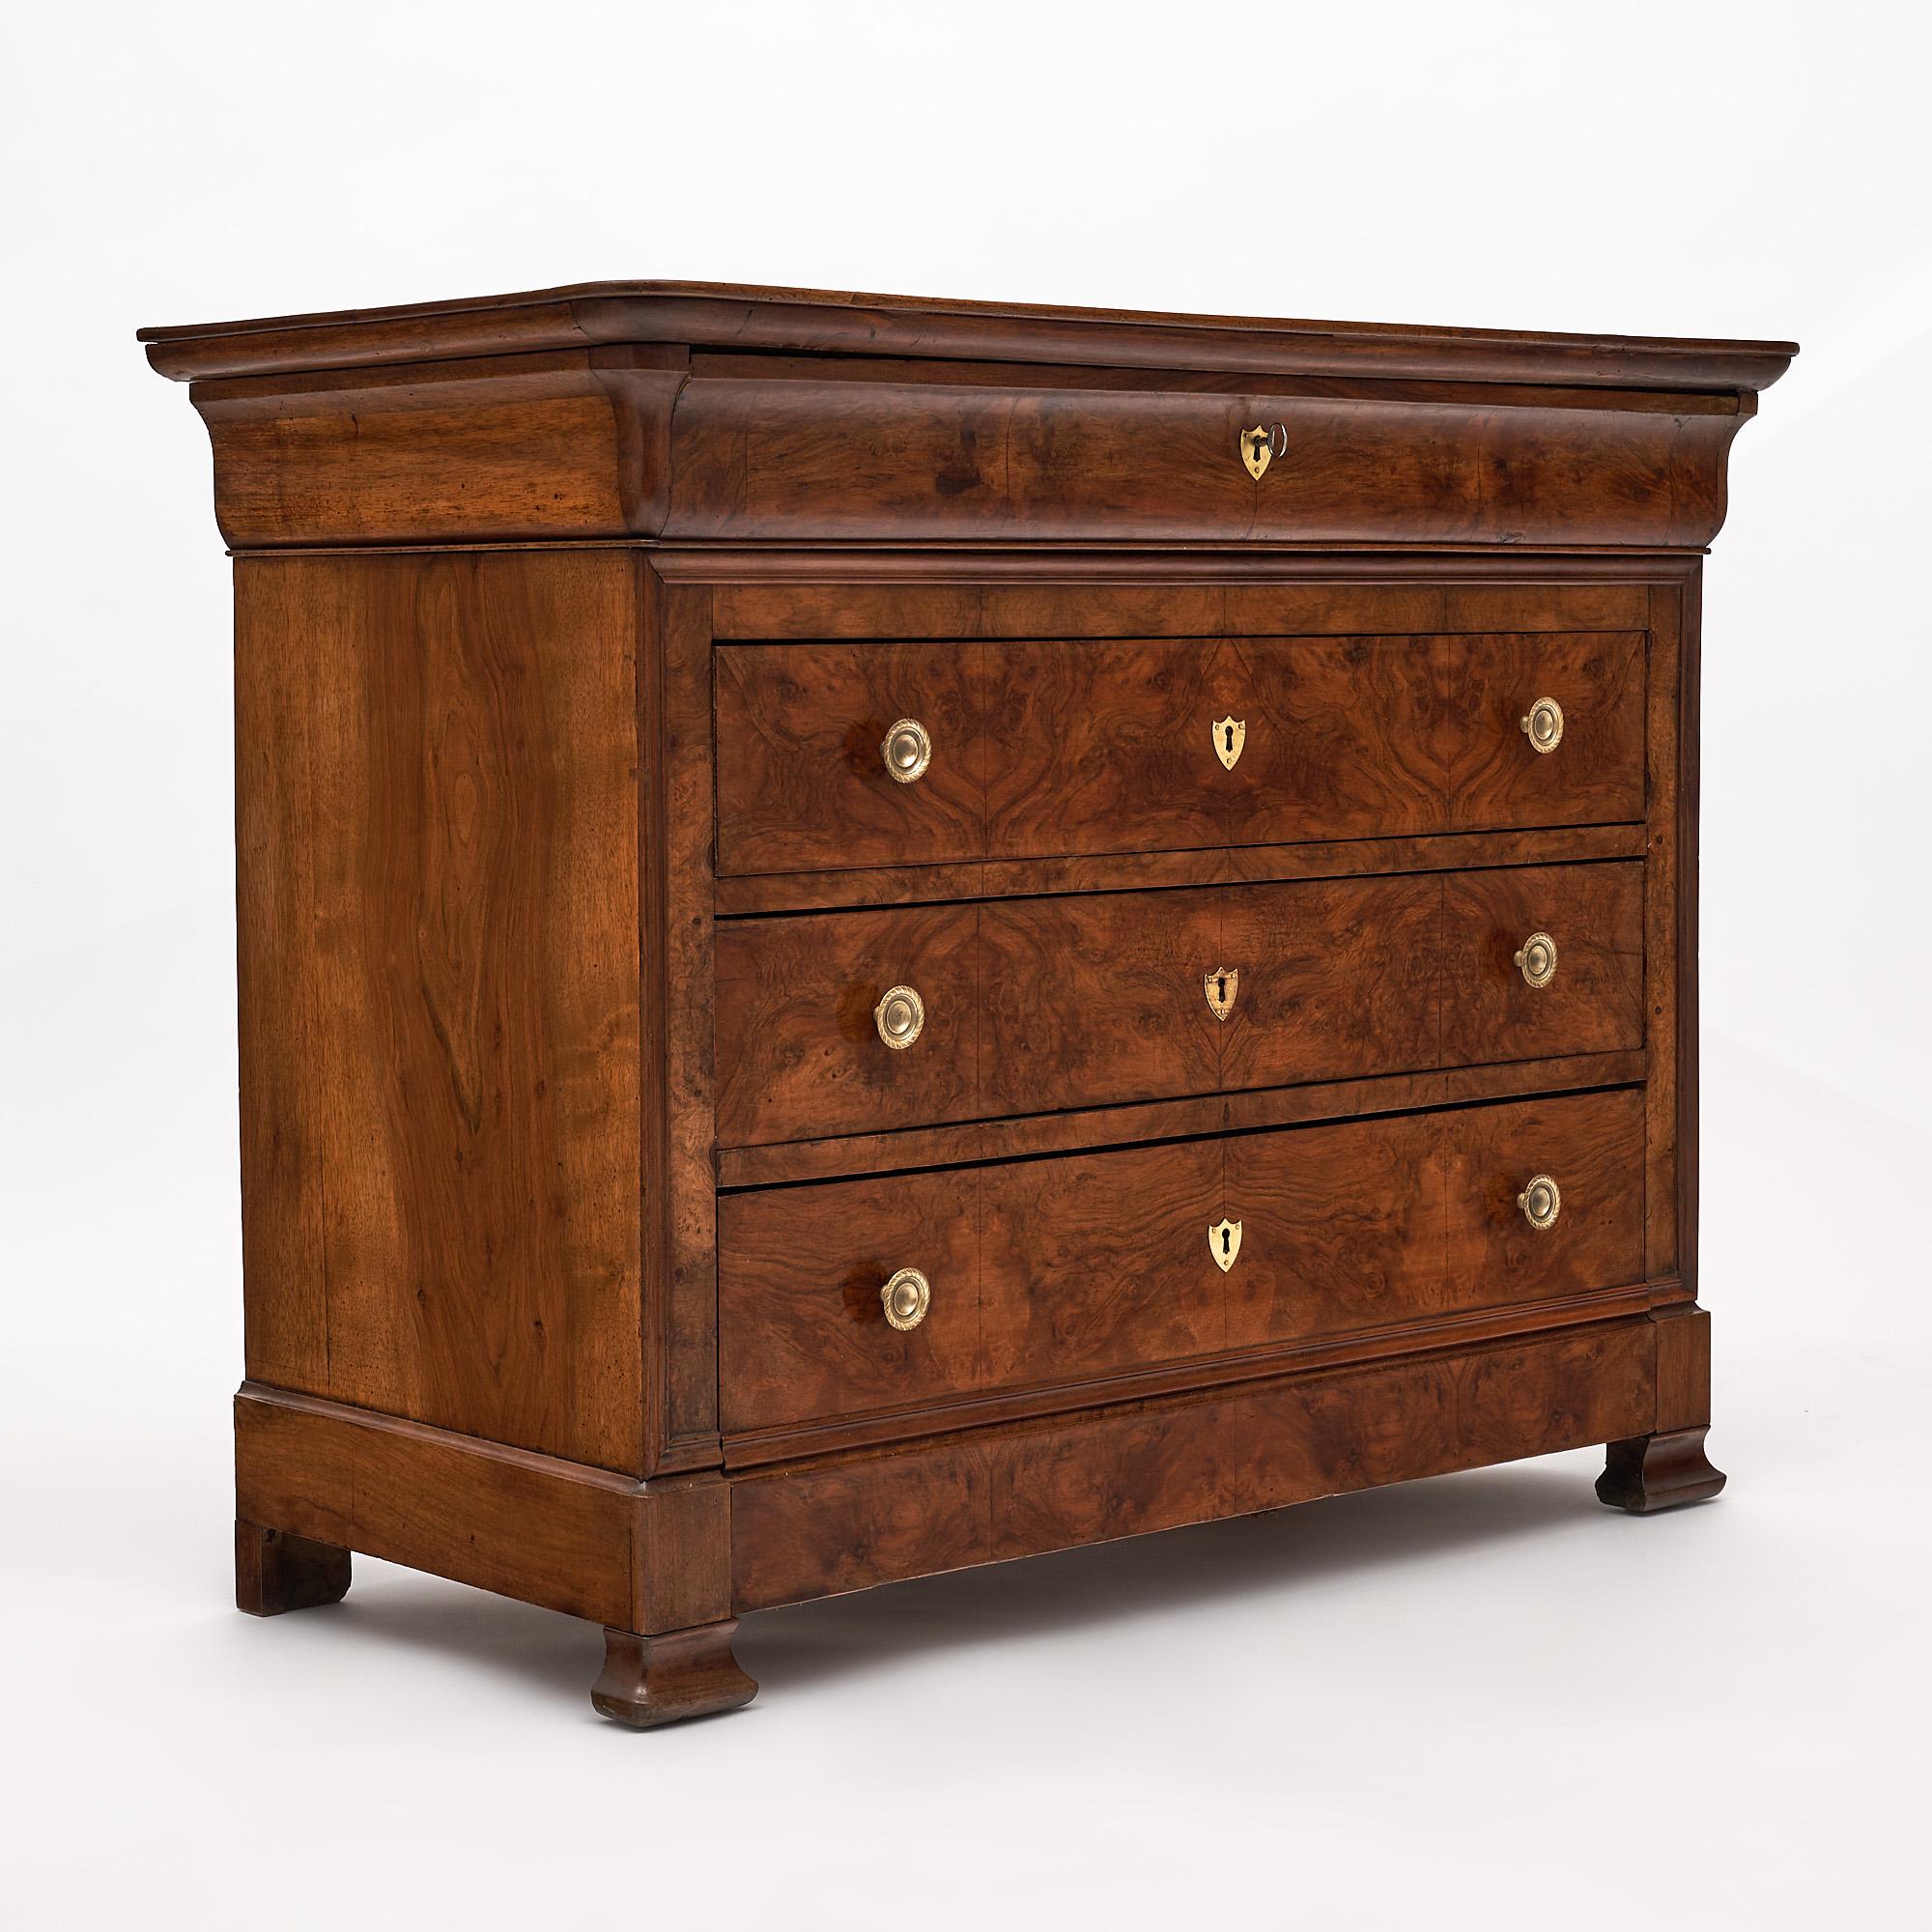 Chest of drawers, “commode”, French, from the Rhone Valley. This Louis Philippe period piece is made of solid walnut and burled walnut. The chest is in superb antique condition and finished with a lustrous French polish finish. The cabinet features